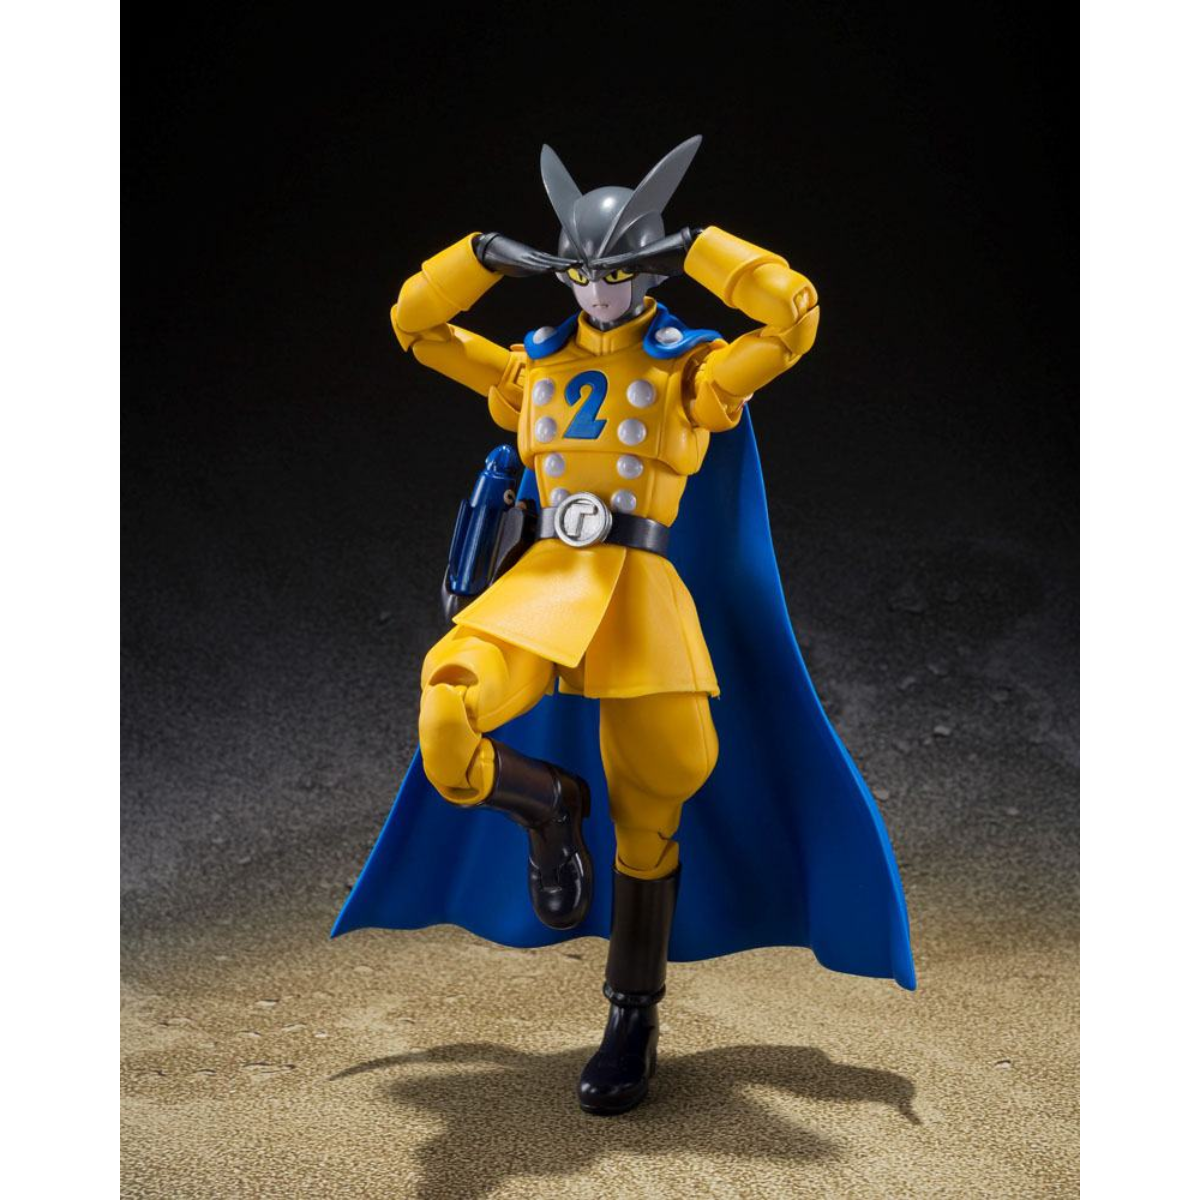 Dragon Ball Super: Super Hero S.H. Figuarts Action Figure "Gamma 2"-Tamashii-Ace Cards & Collectibles